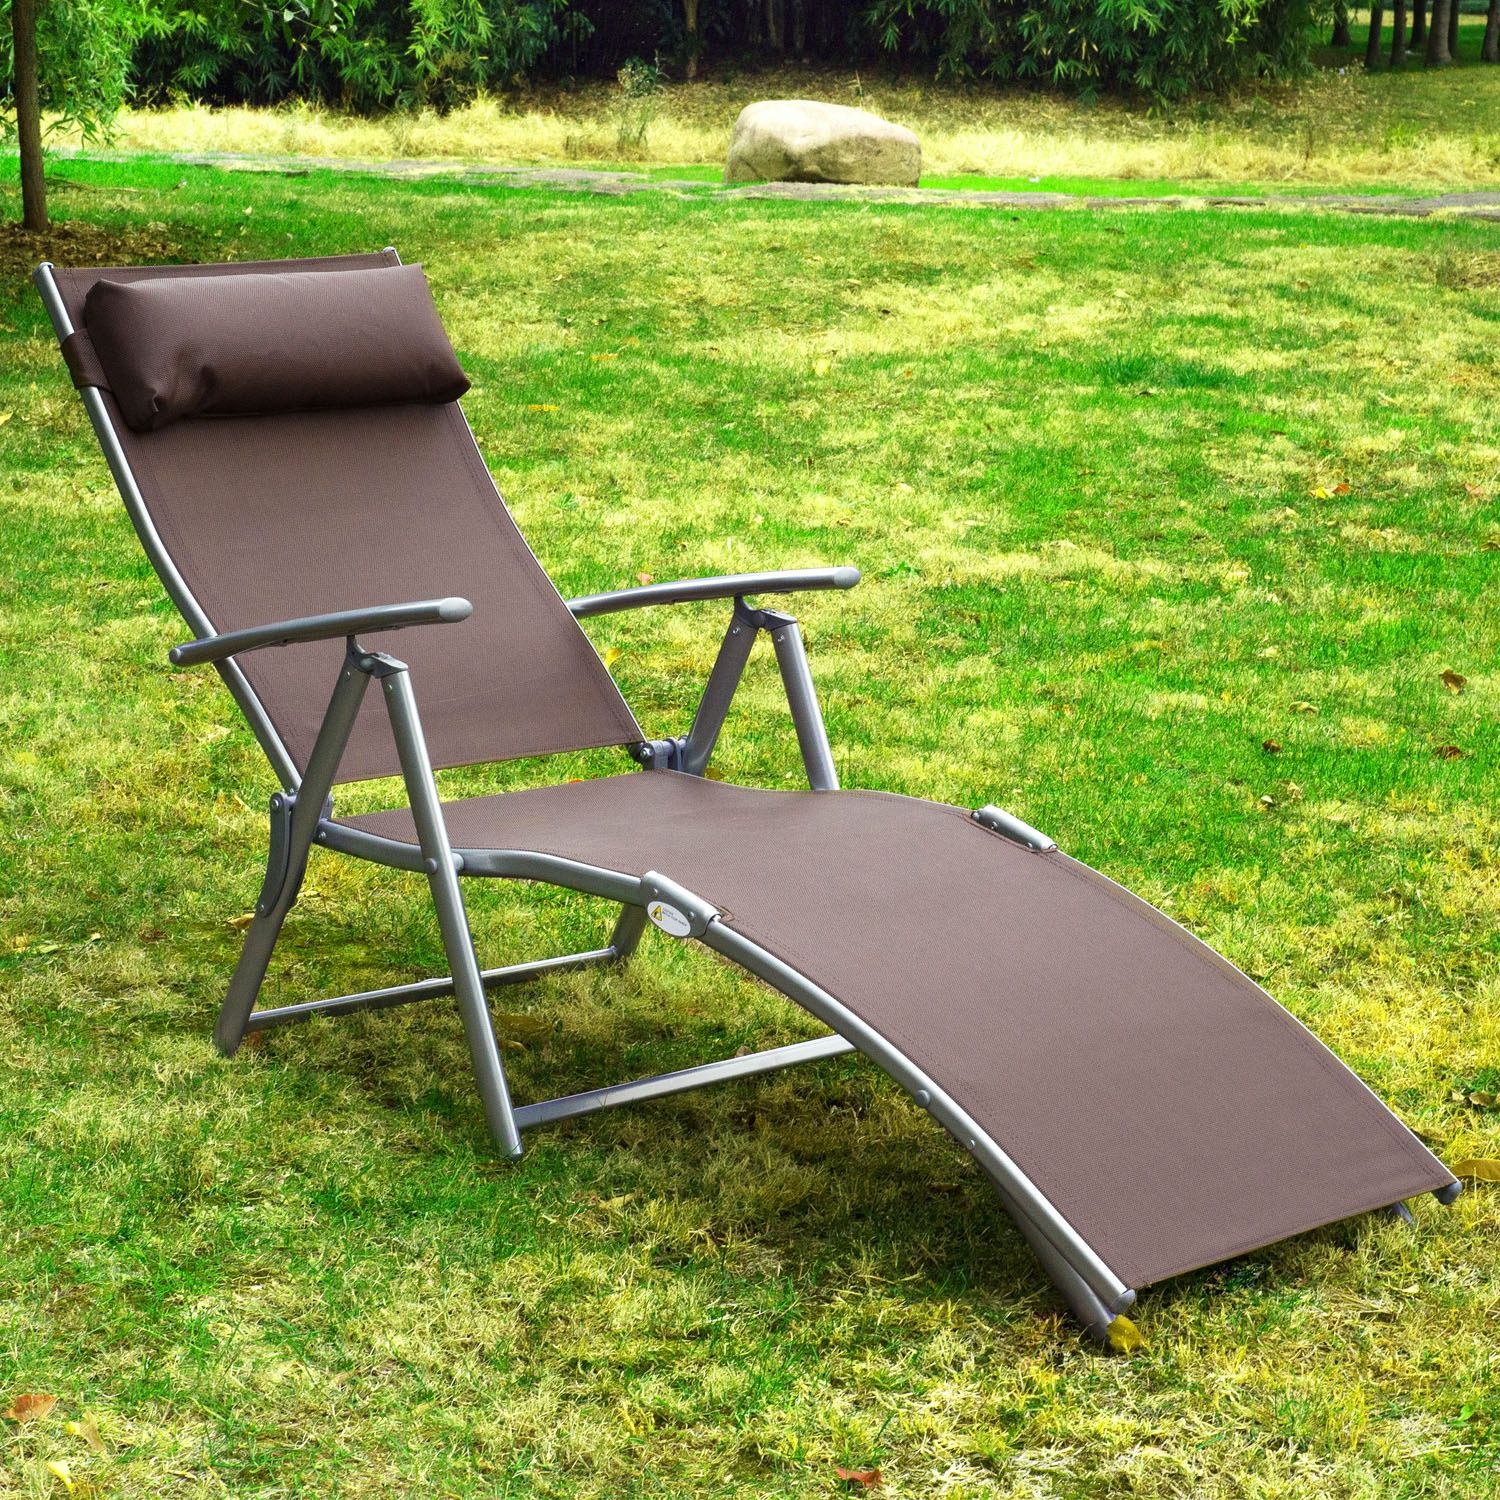 Outsunny Heavy Duty Adjustable Folding Reclining Chair Outdoor Sun Intended For Adjustable Outdoor Lounger Chairs (View 7 of 15)